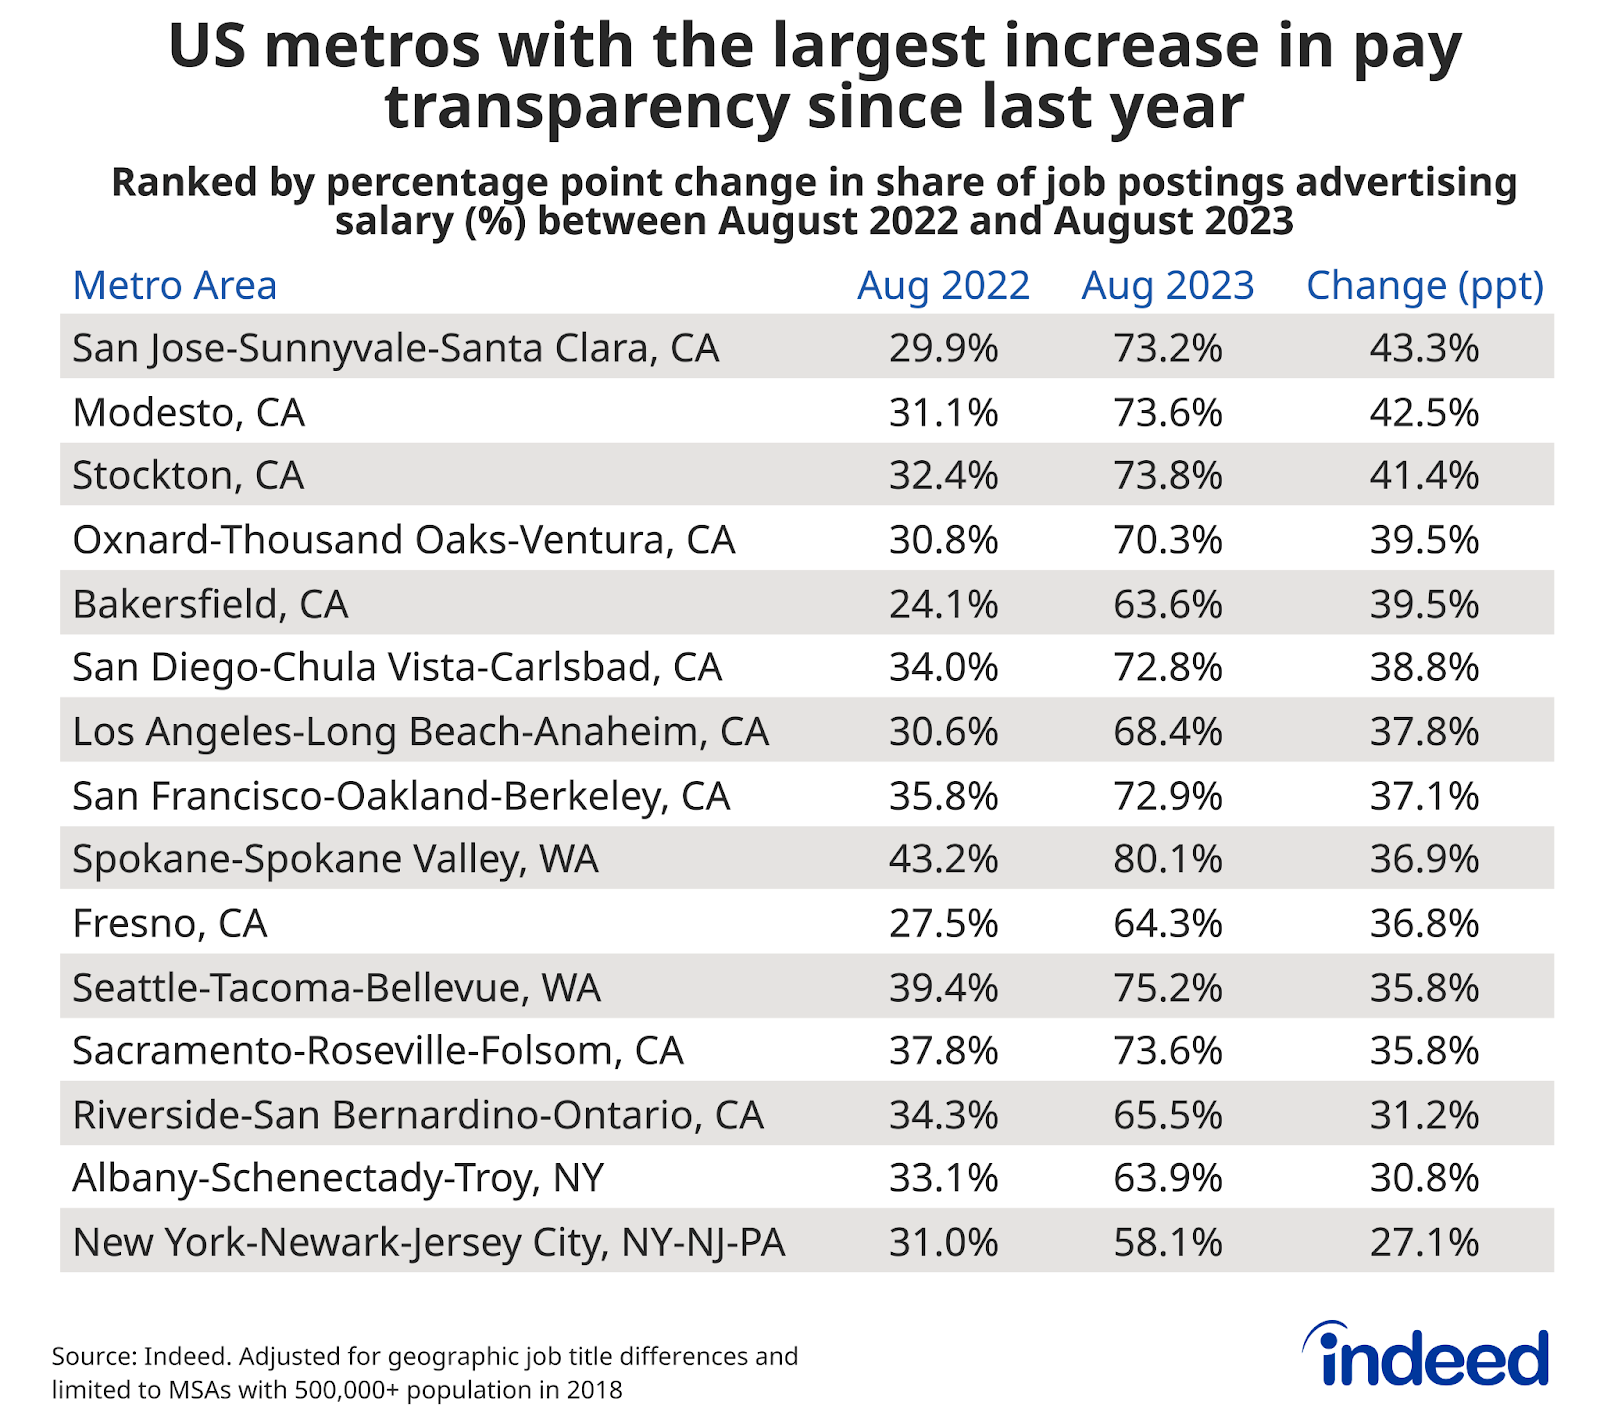 Chart titled “US metros with the largest increase in pay transparency since last year” with columns named “Metro Area,” “Aug 2022,” “Aug 2023,” and “Change (ppt).” Indeed tracked the percentage share of US job postings that included employer-provided salaries between August 2022 and August 2023. San Jose-Sunnyvale-Santa Clara, California topped the list with the largest gain in transparency share—an increase of 43.3% compared to last year. 